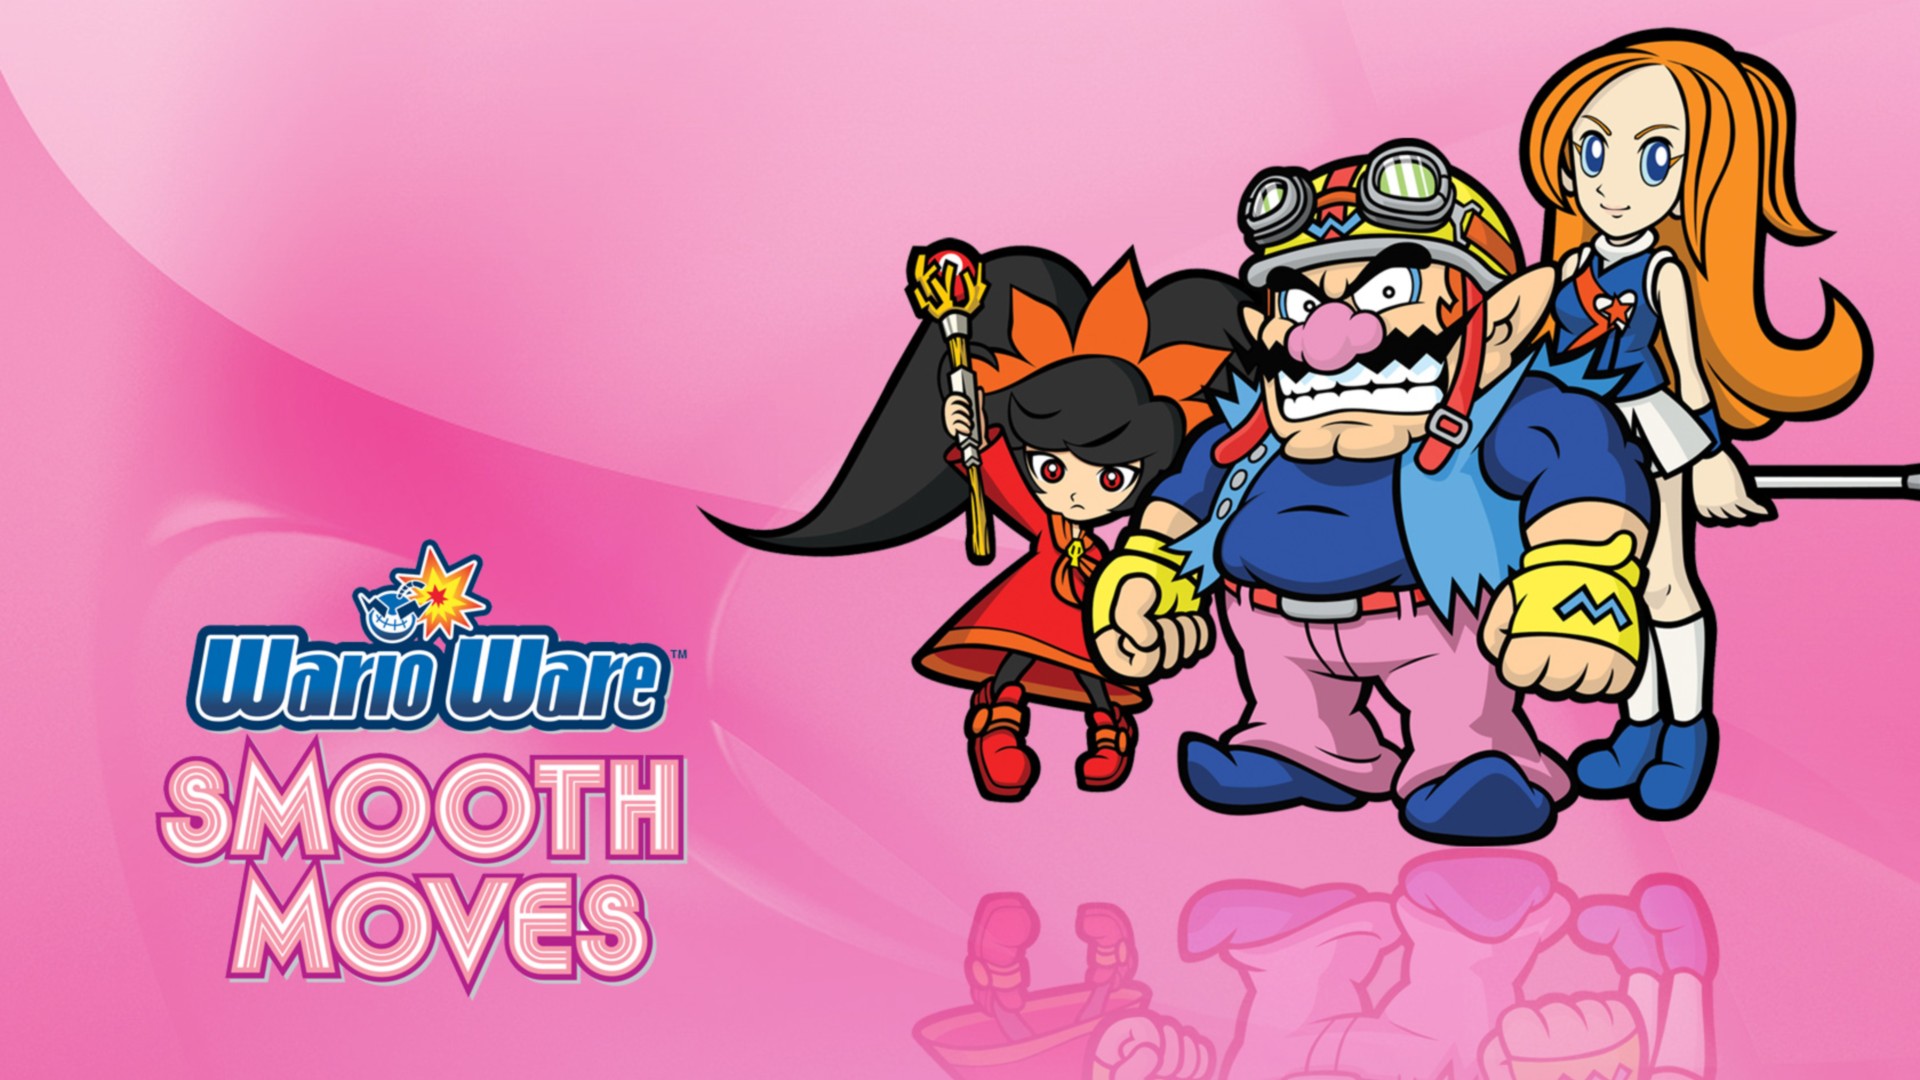 Video Game WarioWare: Smooth Moves HD Wallpaper | Background Image